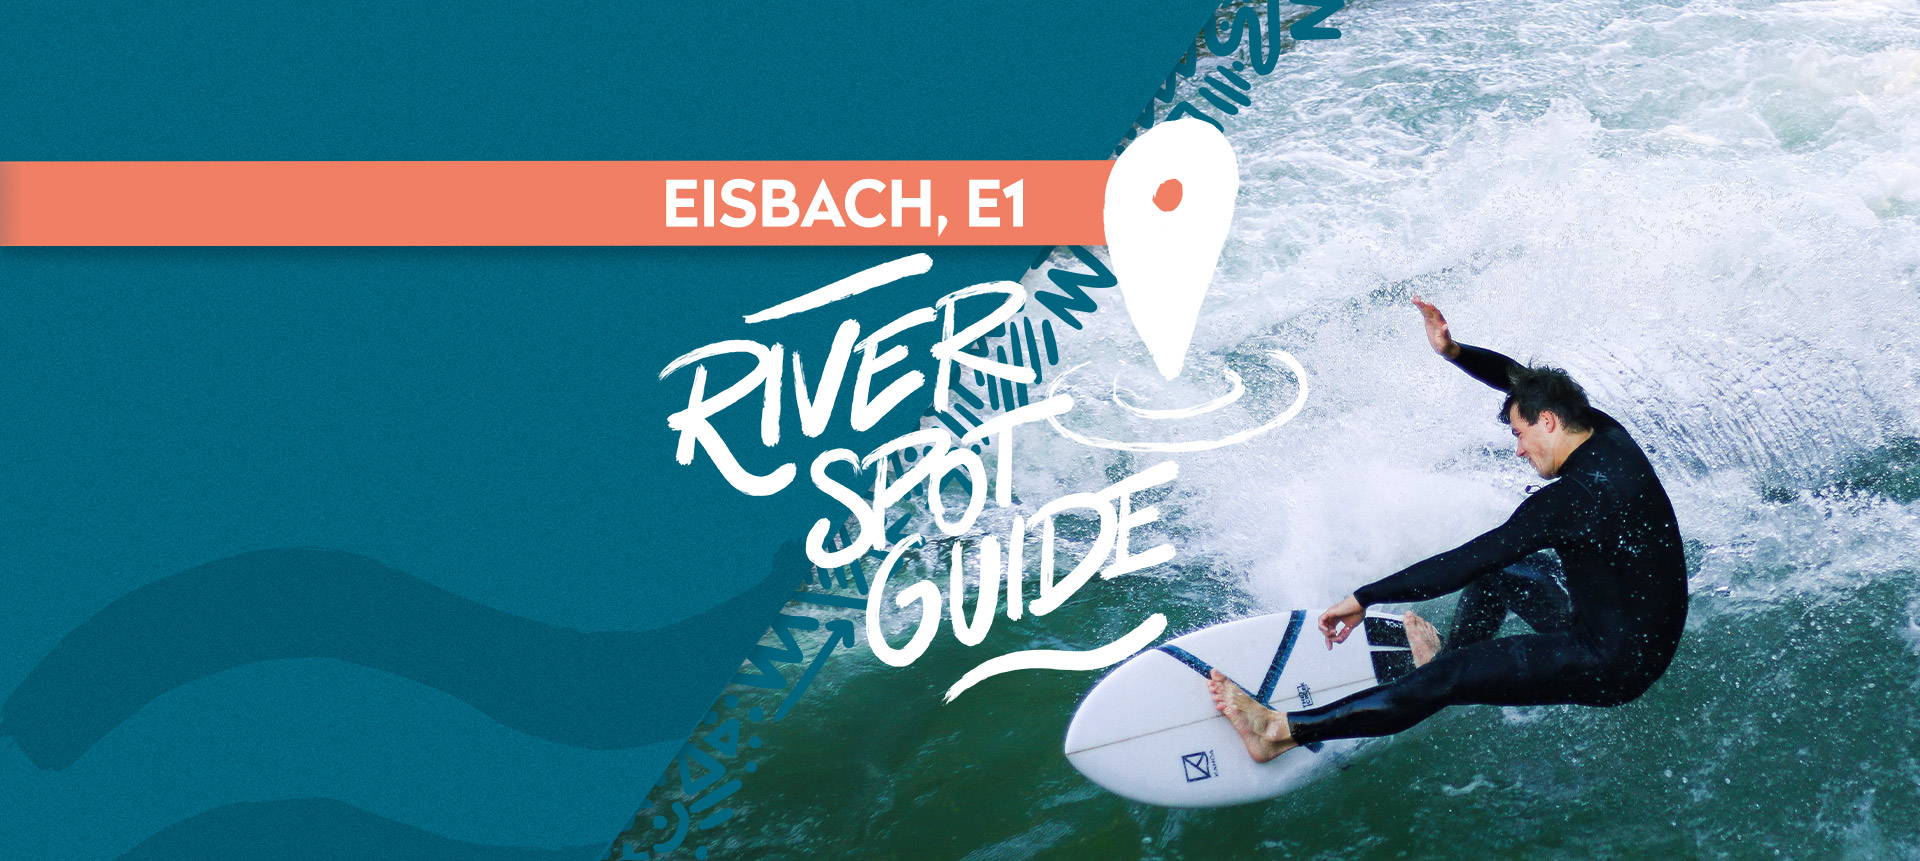 Learn about the Eisbach in Munich and discover the perfect fitting riverboard Surfboards